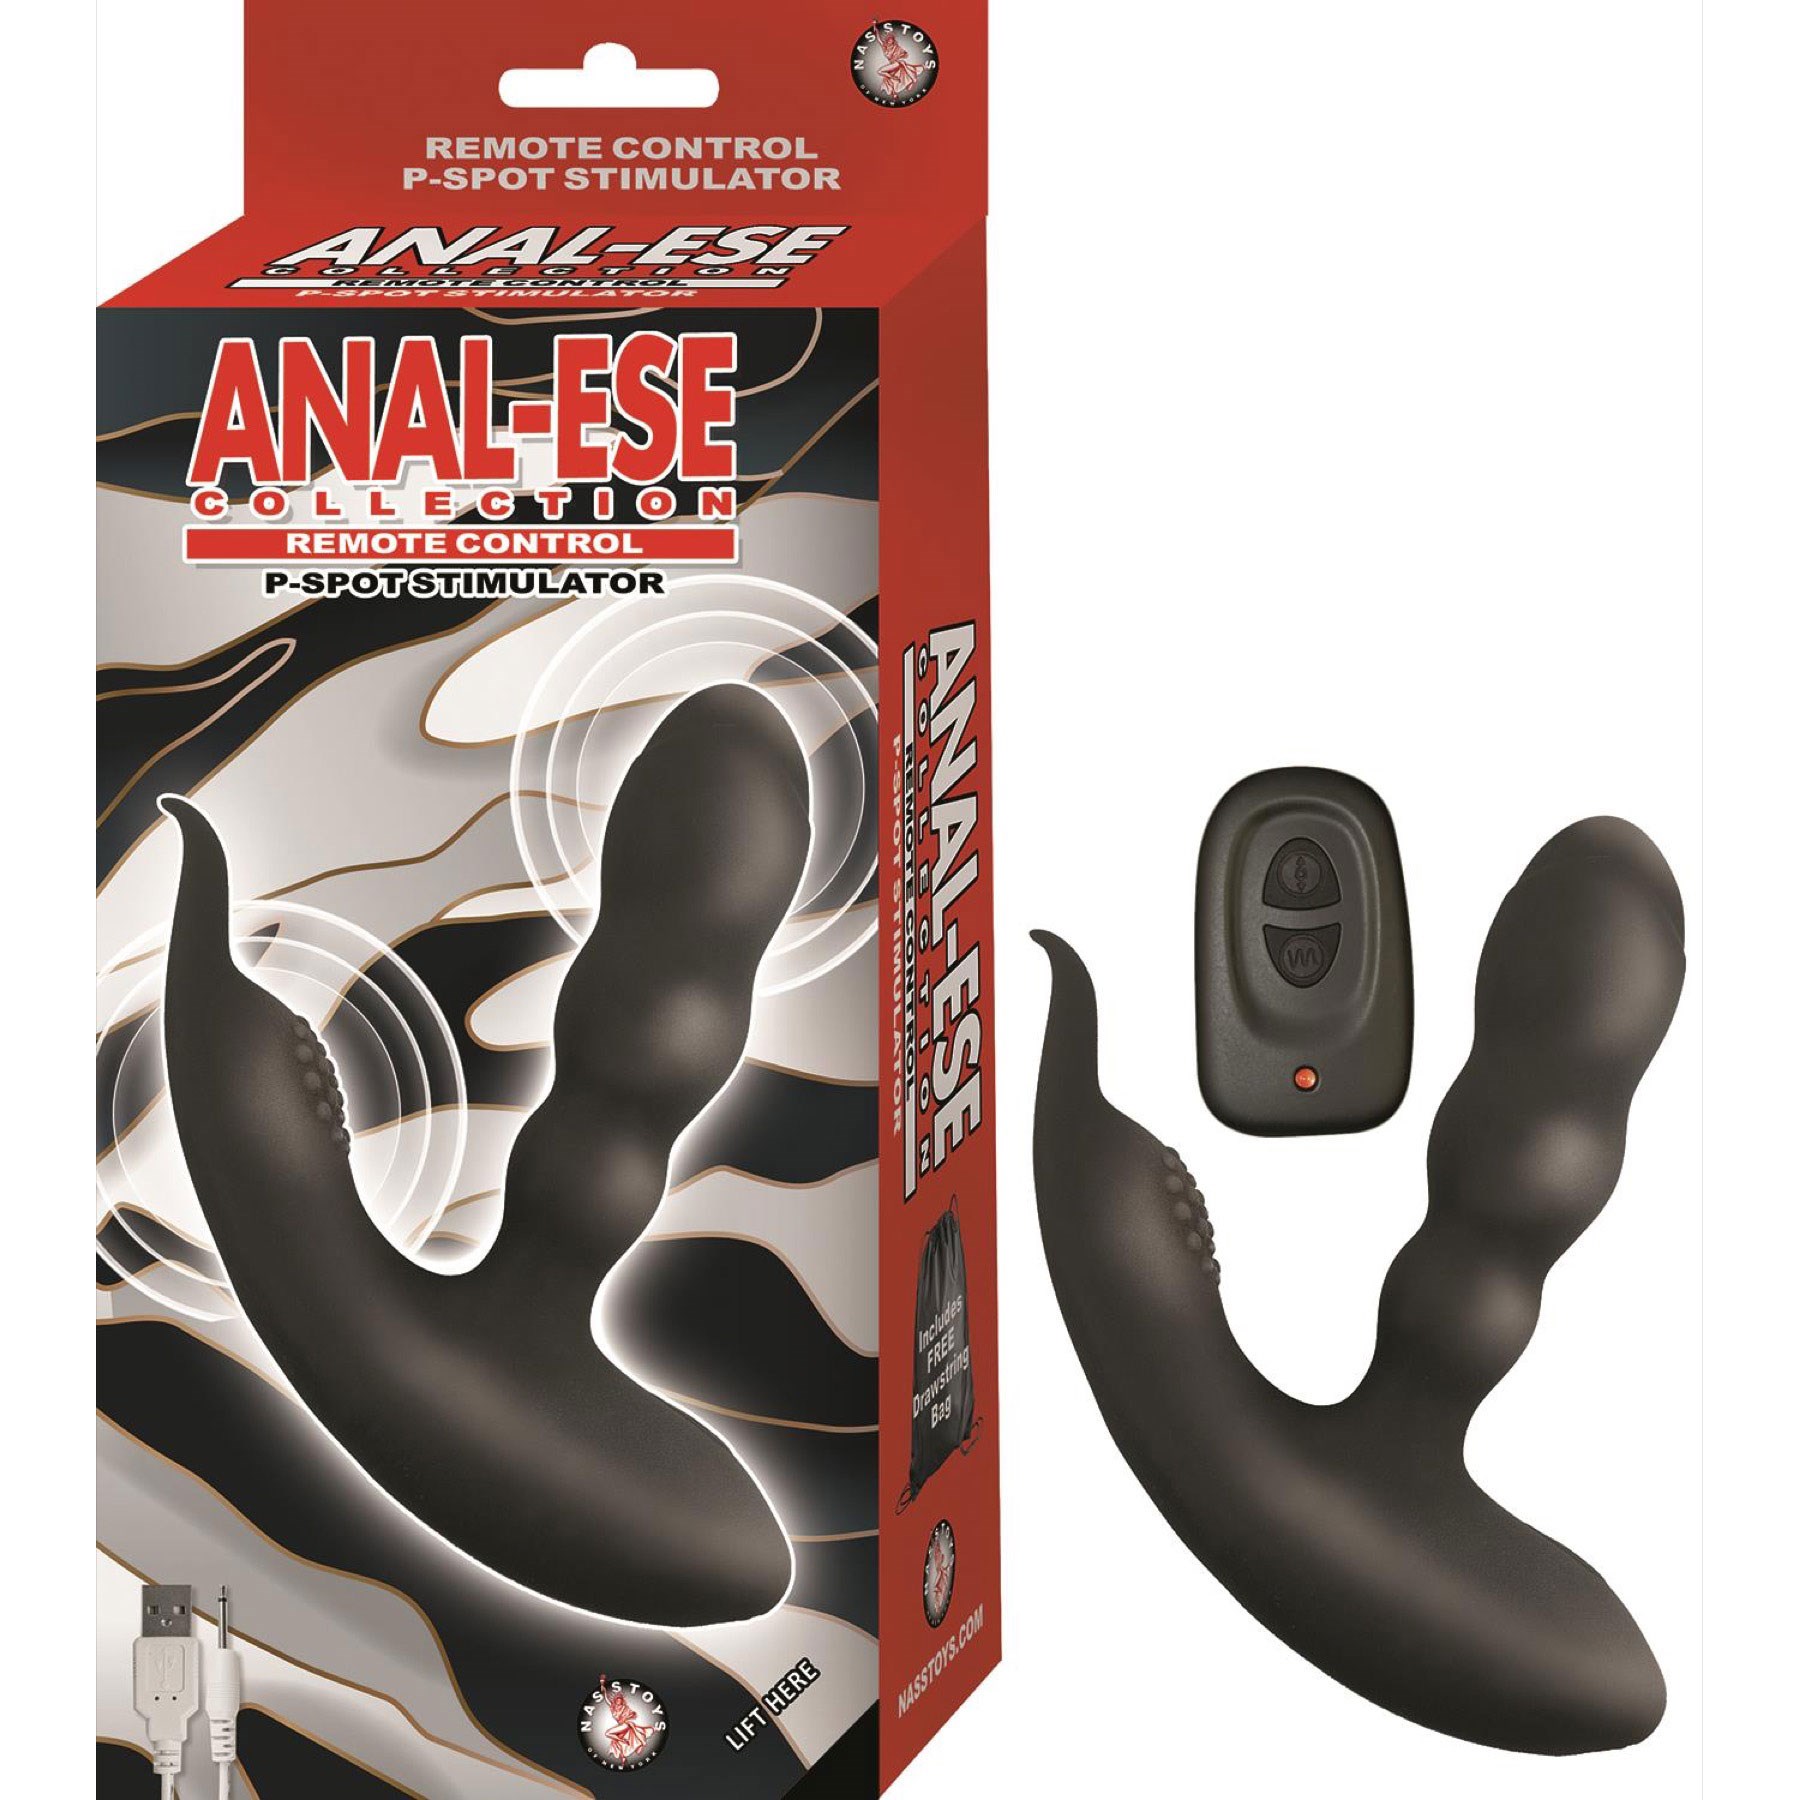 Anal Ese Remote Control P-Spot Massager